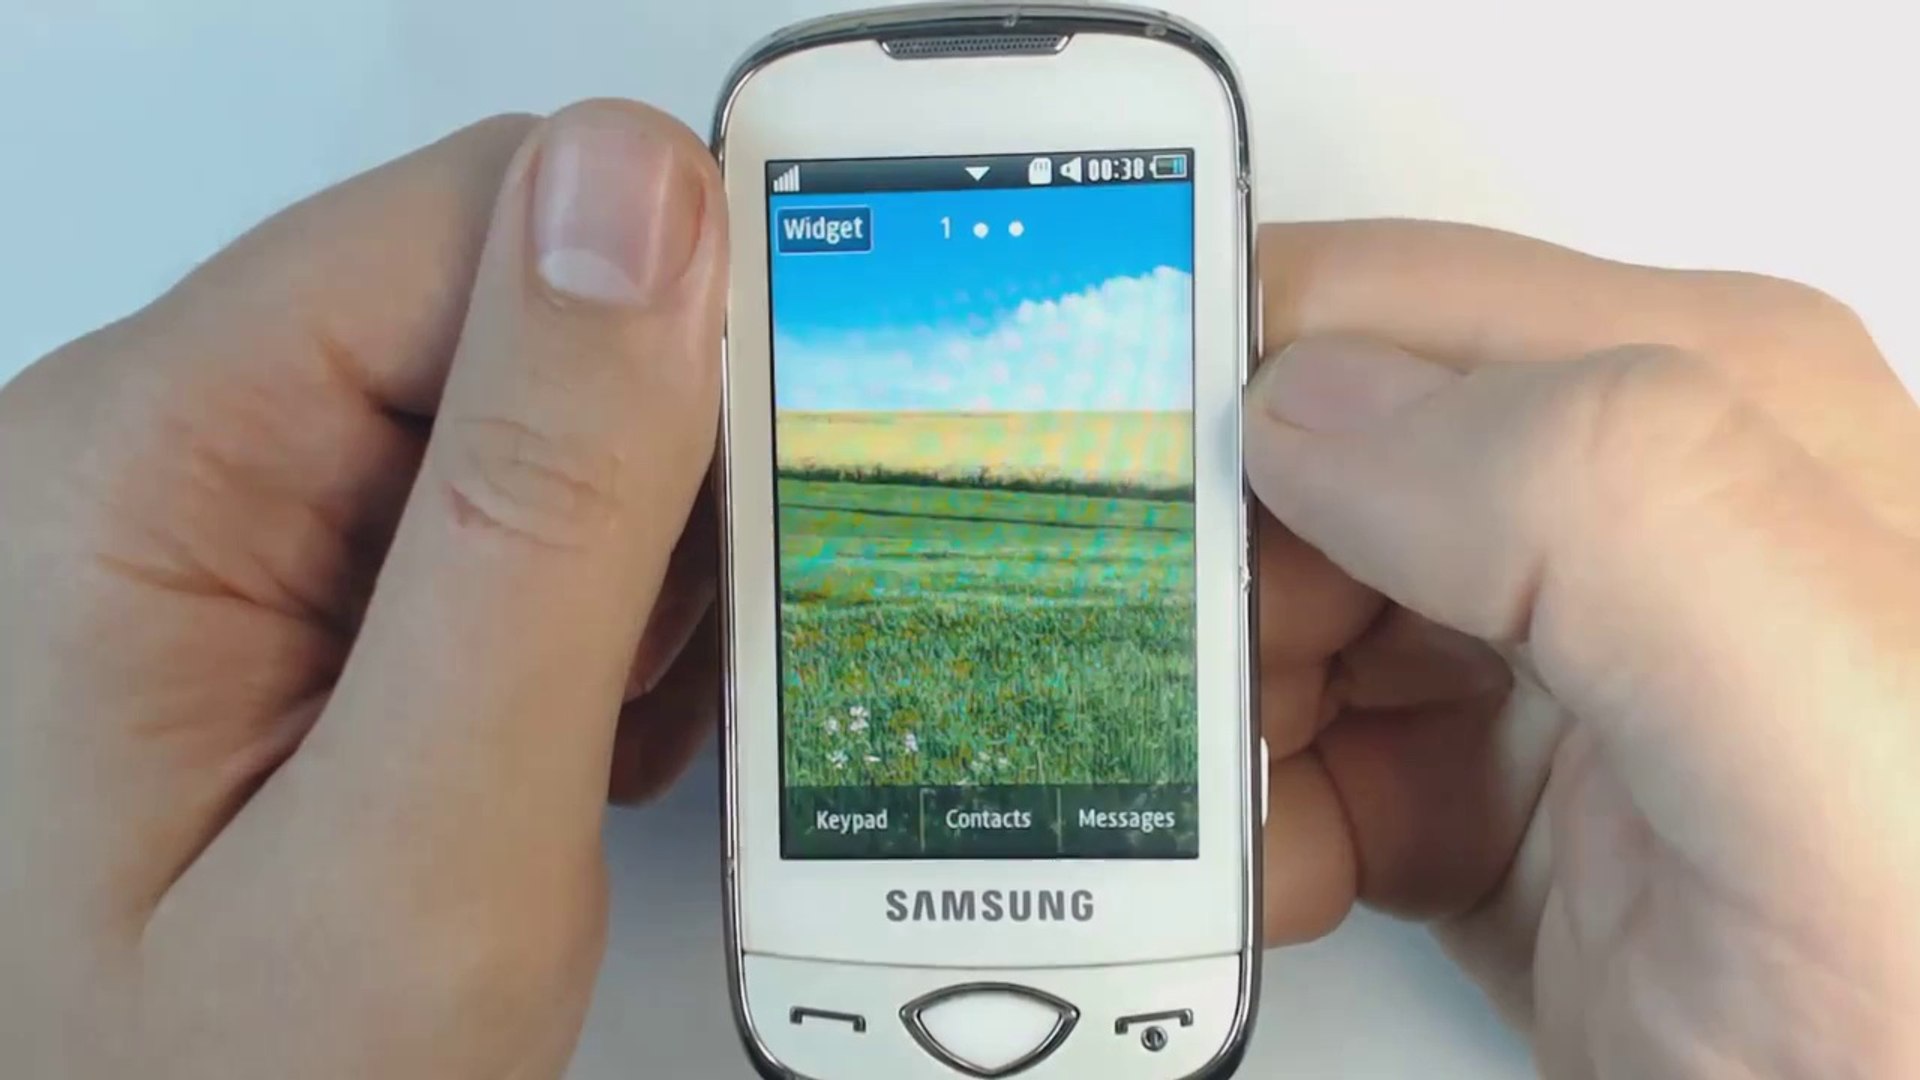 Samsung S5560i factory reset - Dailymotion Video